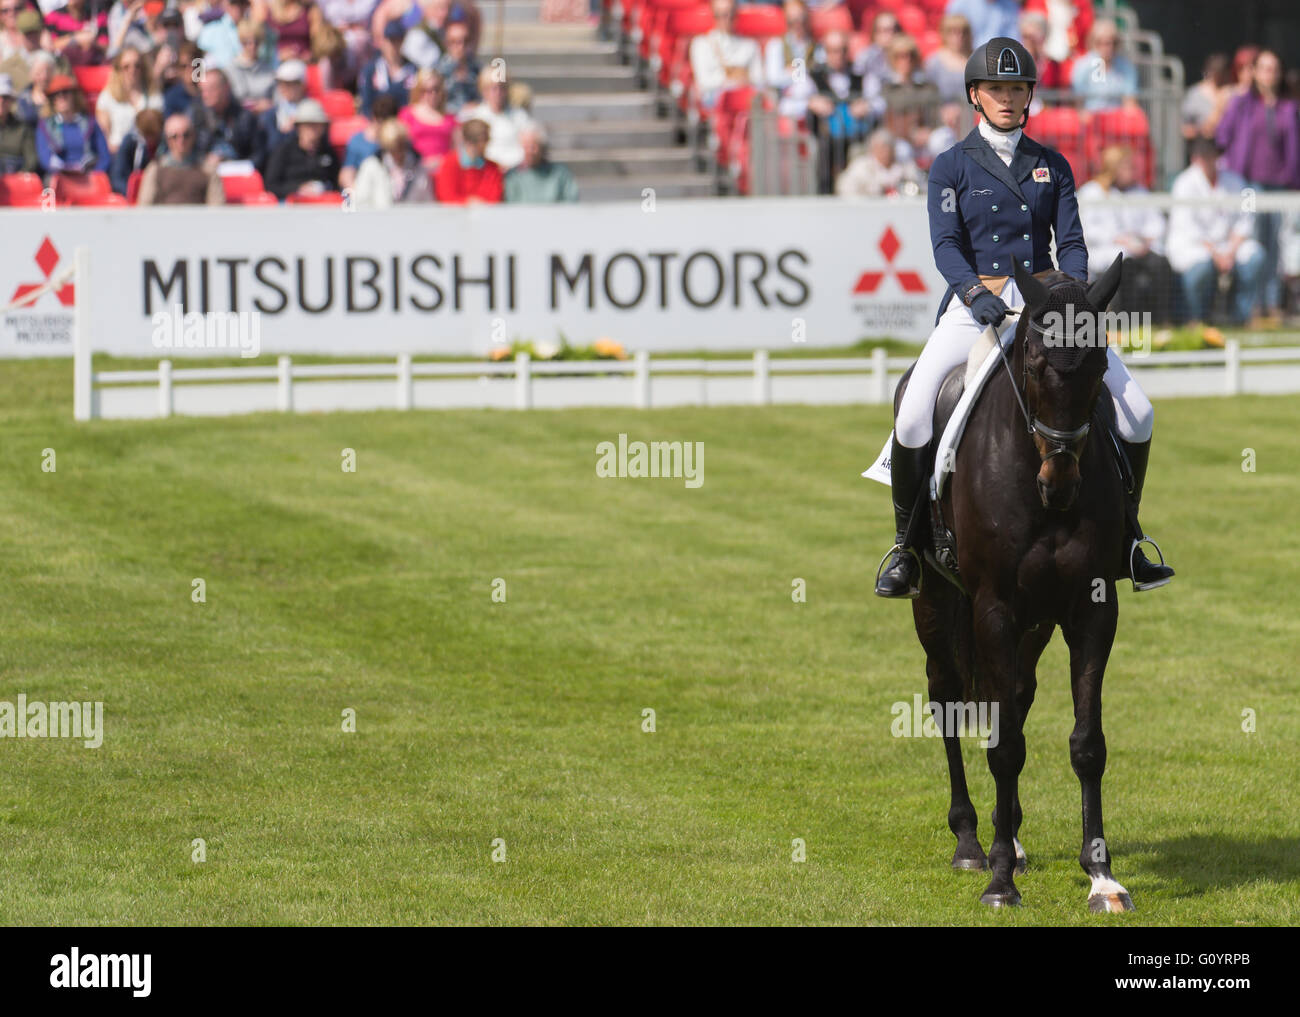 Badminton, South Gloucestershire, UK,  6th May 2016, Emily King and her horse Brooklleigh take part in the Dressage Phase of the Mitsubishi Motors Badminton Horse Trials 2016. Dressage is an advanced form of riding that tests the horse and rider as they perform difficult manoeuvres based around a horse's natural movements. Credit: Trevor Holt / Alamy Live News Stock Photo